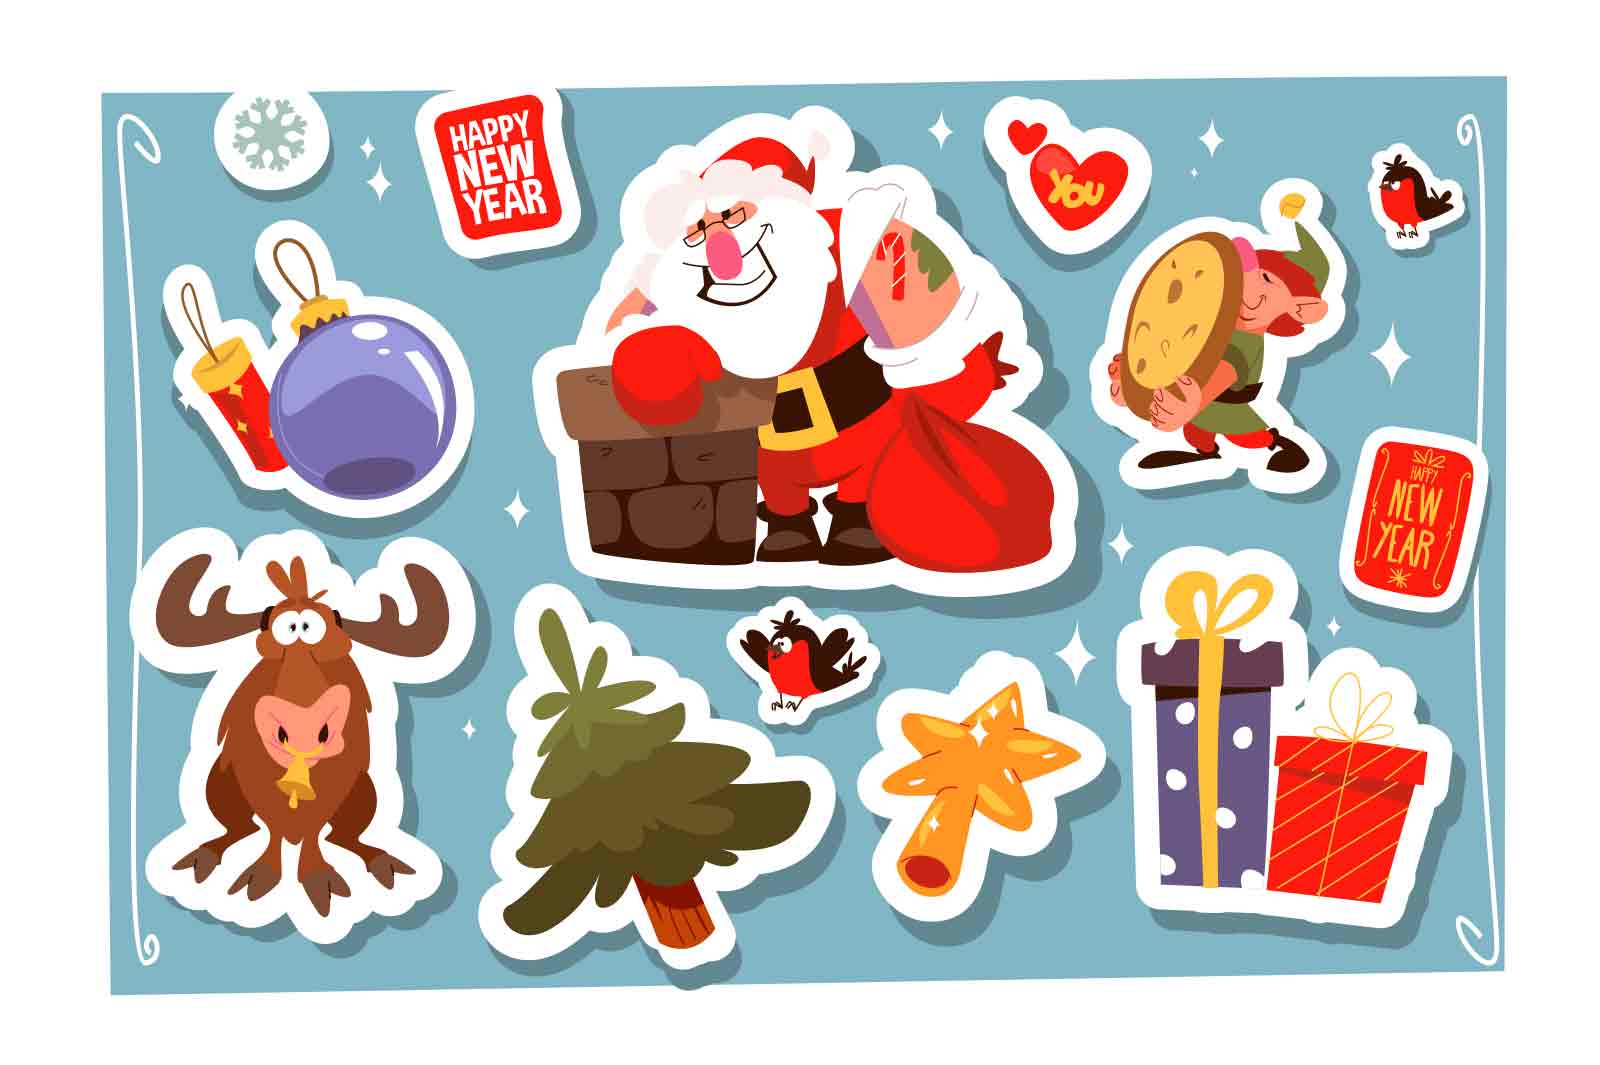 Merry christmas and happy new year stickers vector illustration set. Fir-tree, toys, gift boxes,elf and santa claus flat style concept